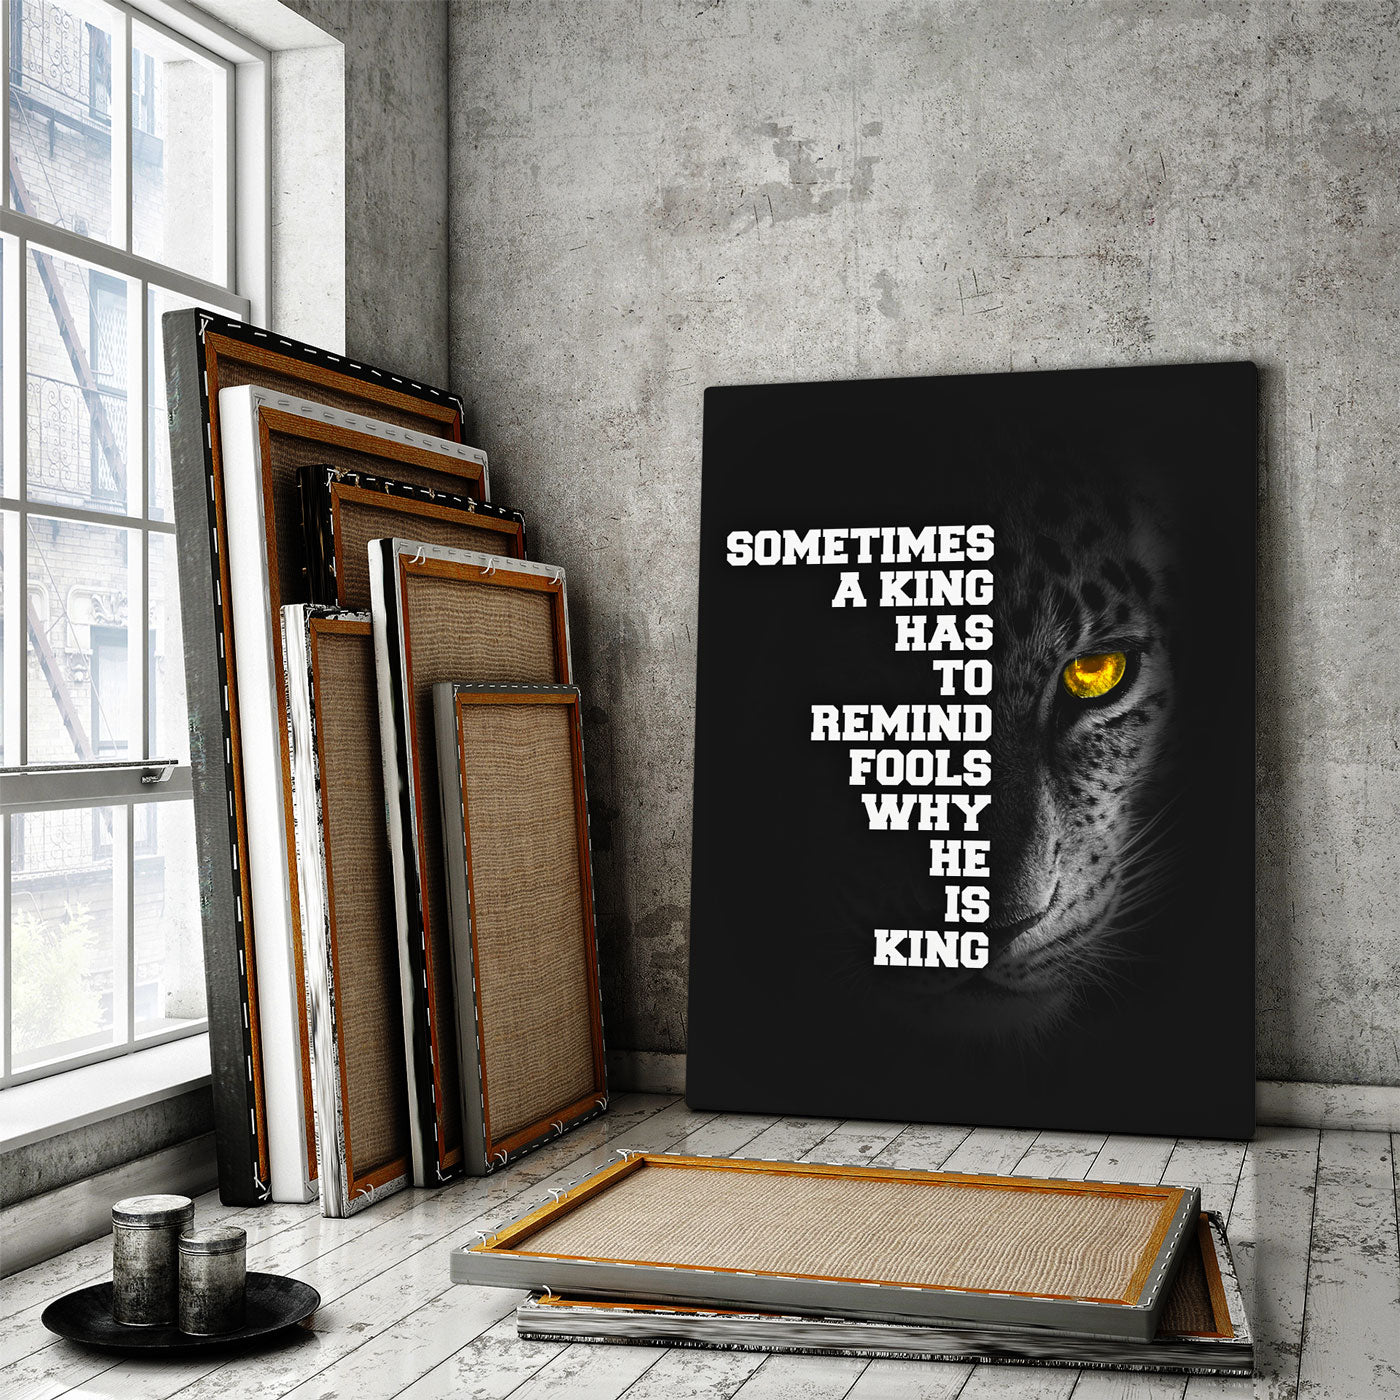 A King Has To Remind - Success Hunters Prints